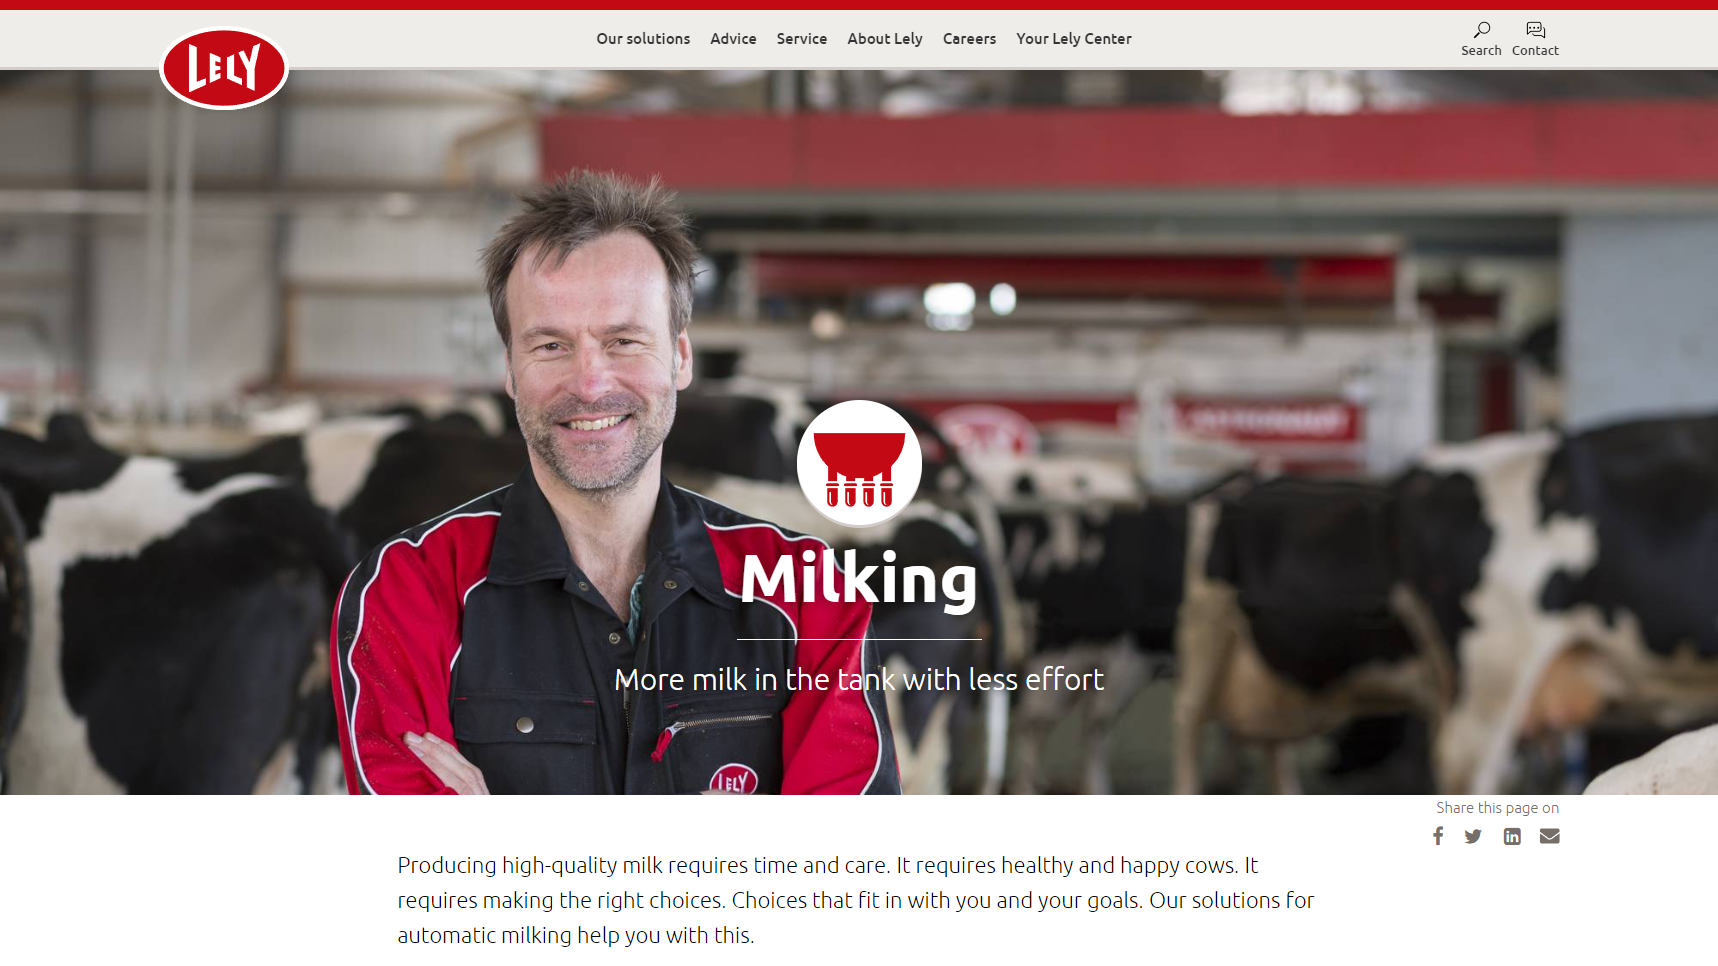 Lely - Dairy Equipment Manufacturer